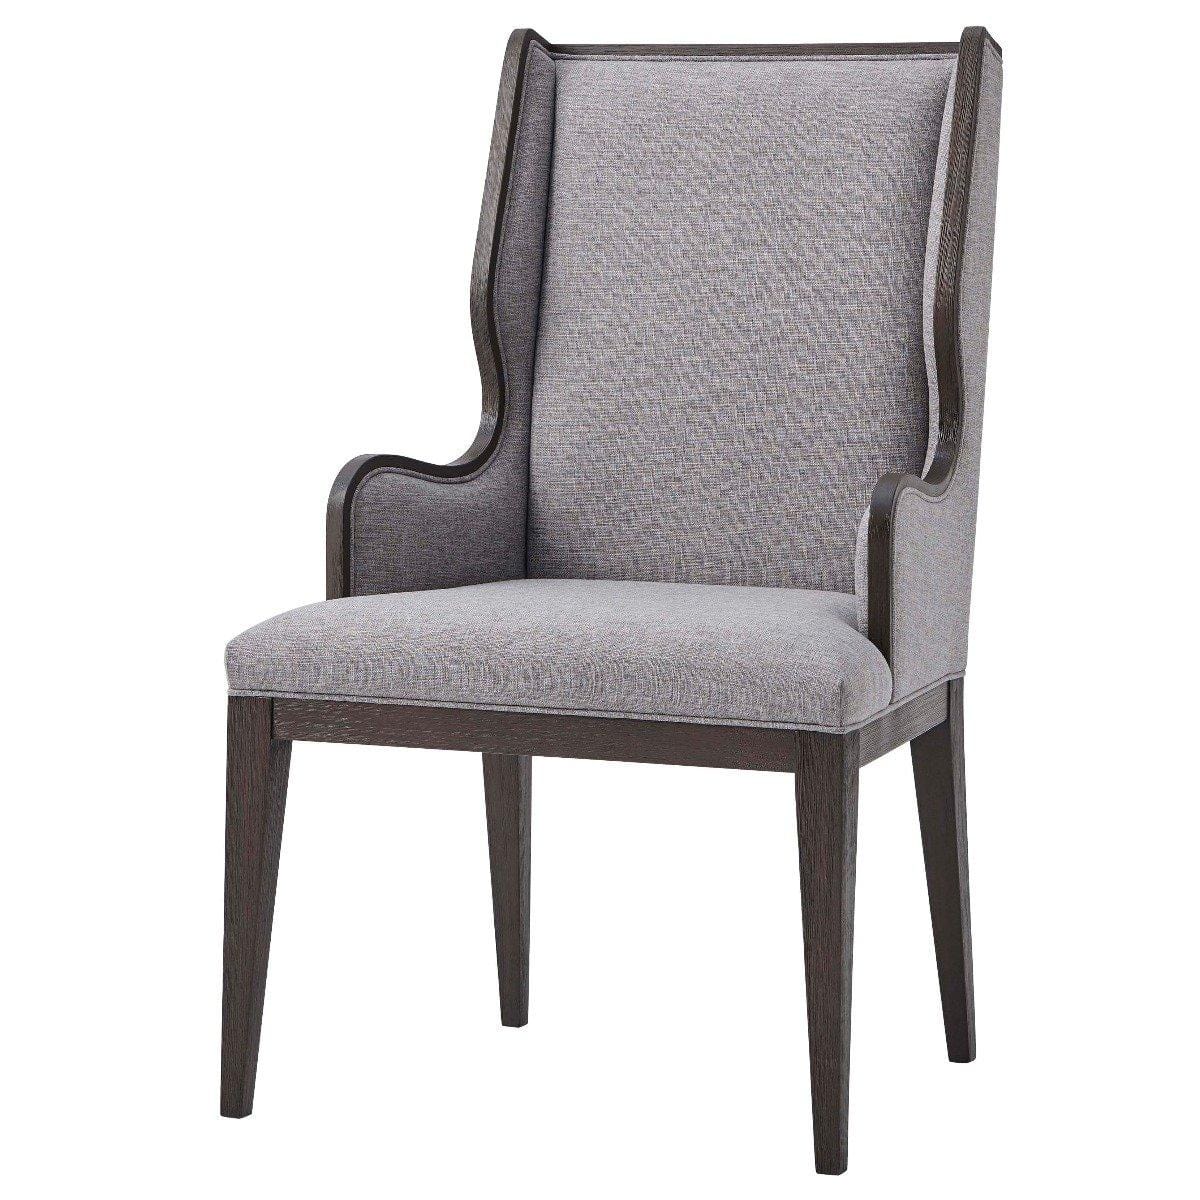 Theodore Alexander Dining Ta Studio Della Wing Back Dining Chair with Arms in Matrix Pewter House of Isabella UK